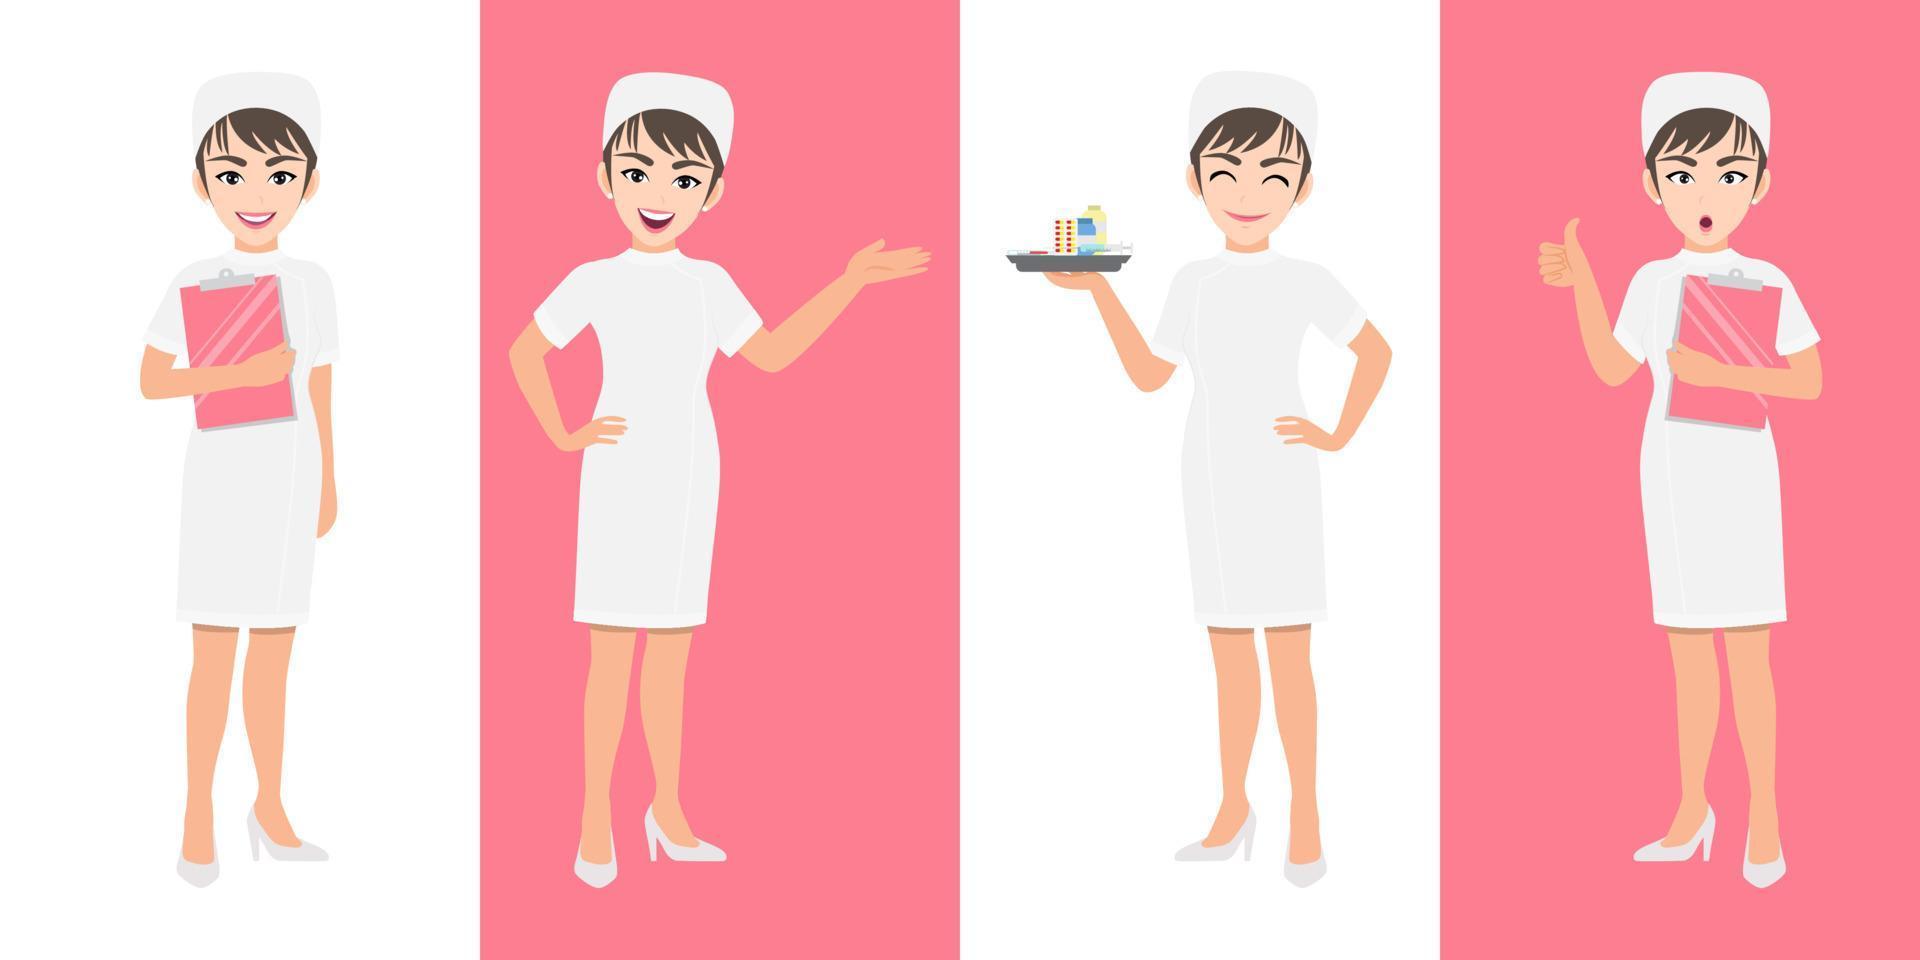 Nurse cartoon character set, Cute nurse in different poses, medical worker or hospital staff. Nurse cartoon Flat icon on a white and pink background vector